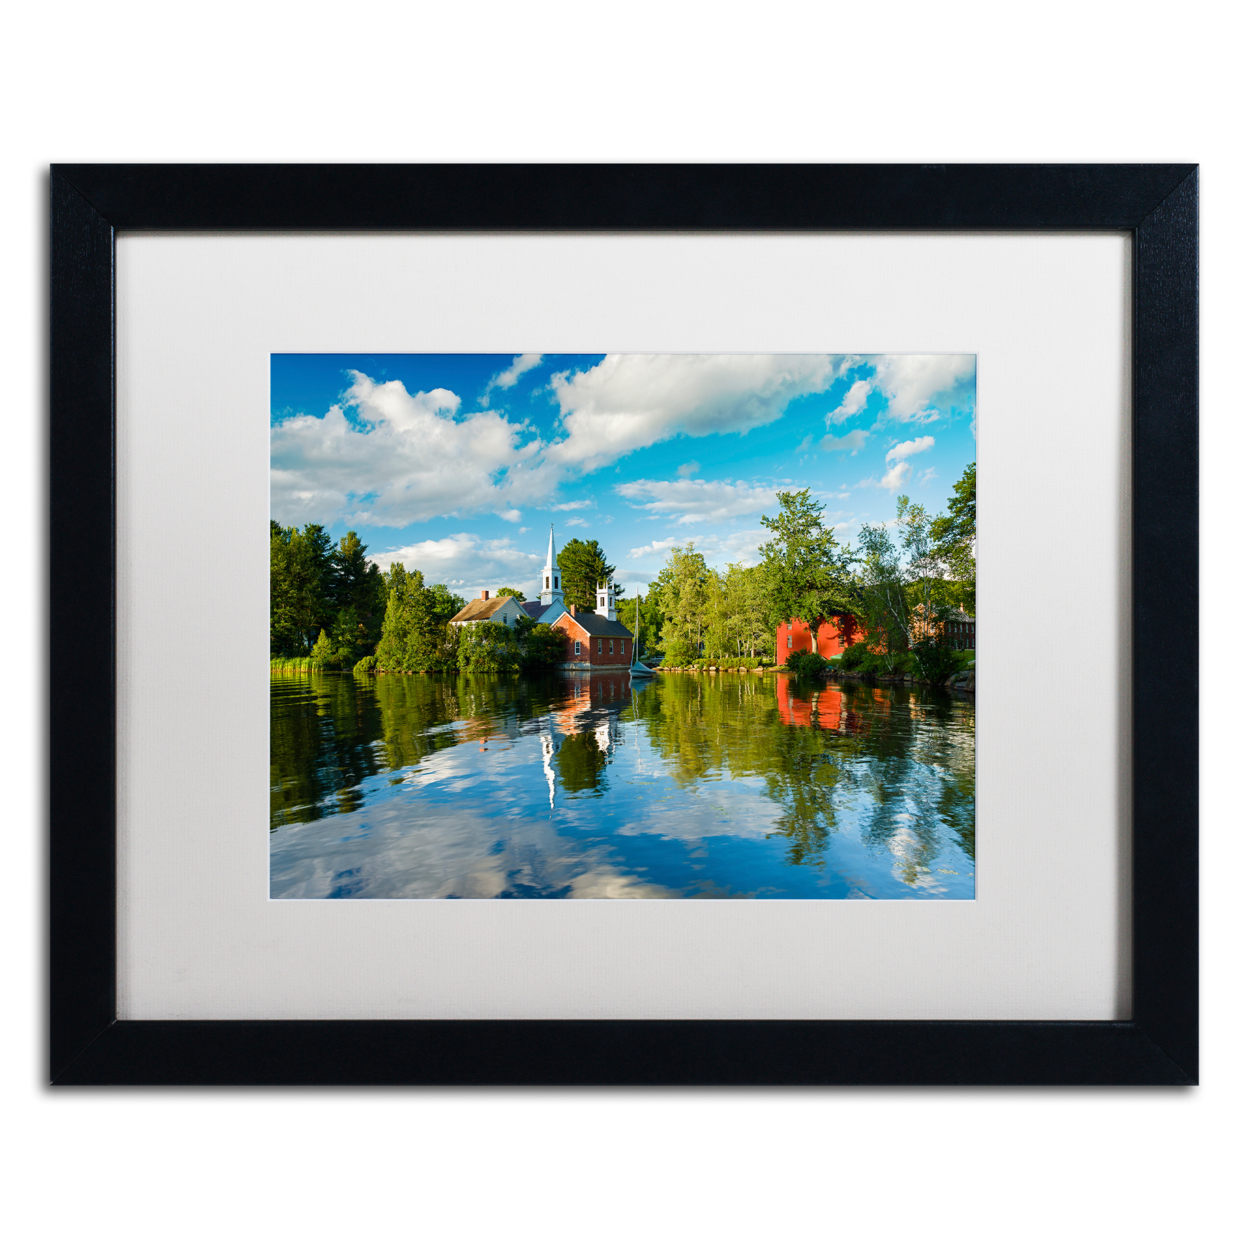 Michael Blanchette Photography 'Old Town Reflection' Black Wooden Framed Art 18 X 22 Inches